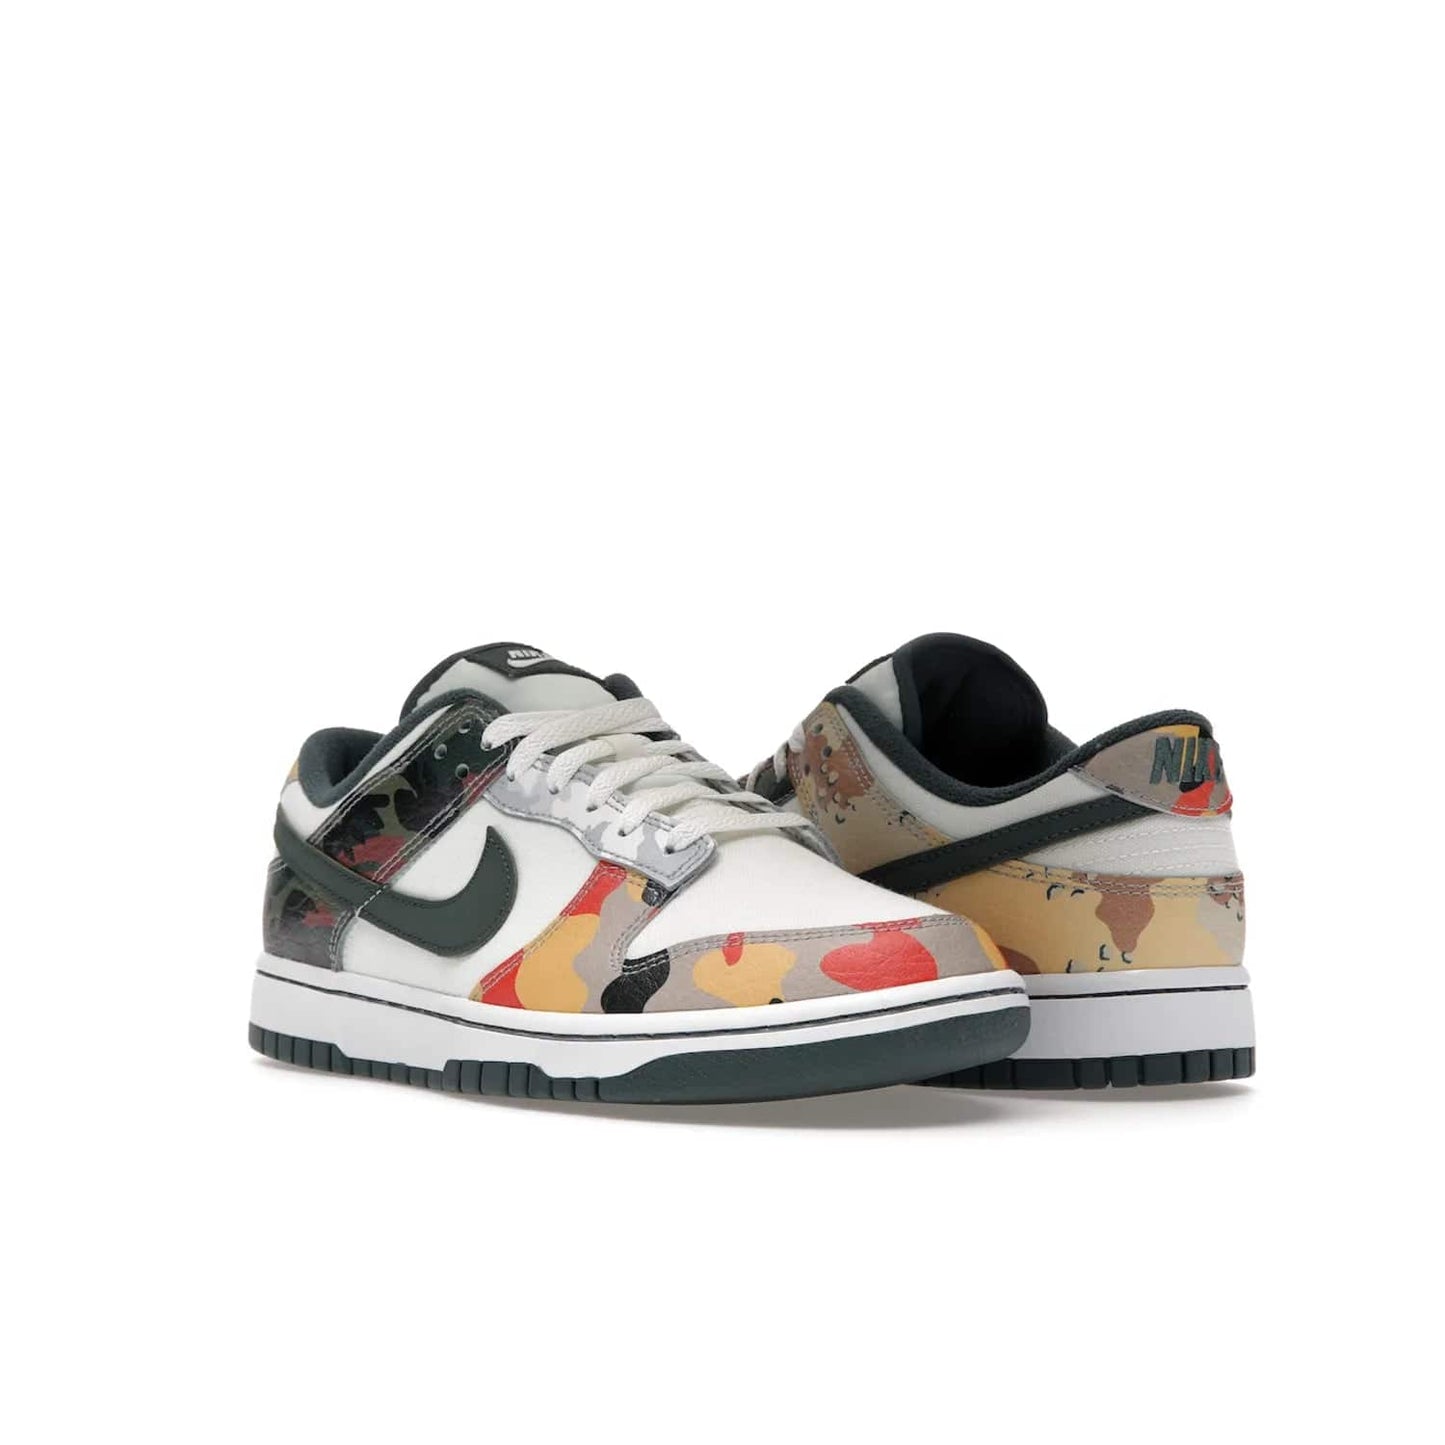 Nike Dunk Low SE Sail Multi-Camo - Image 6 - Only at www.BallersClubKickz.com - Classic design meets statement style in the Nike Dunk Low SE Sail Multi-Camo. White leather base with multi-color camo overlays, vibrant Nike Swooshes, and orange Nike embroidery. Get yours August 2021.